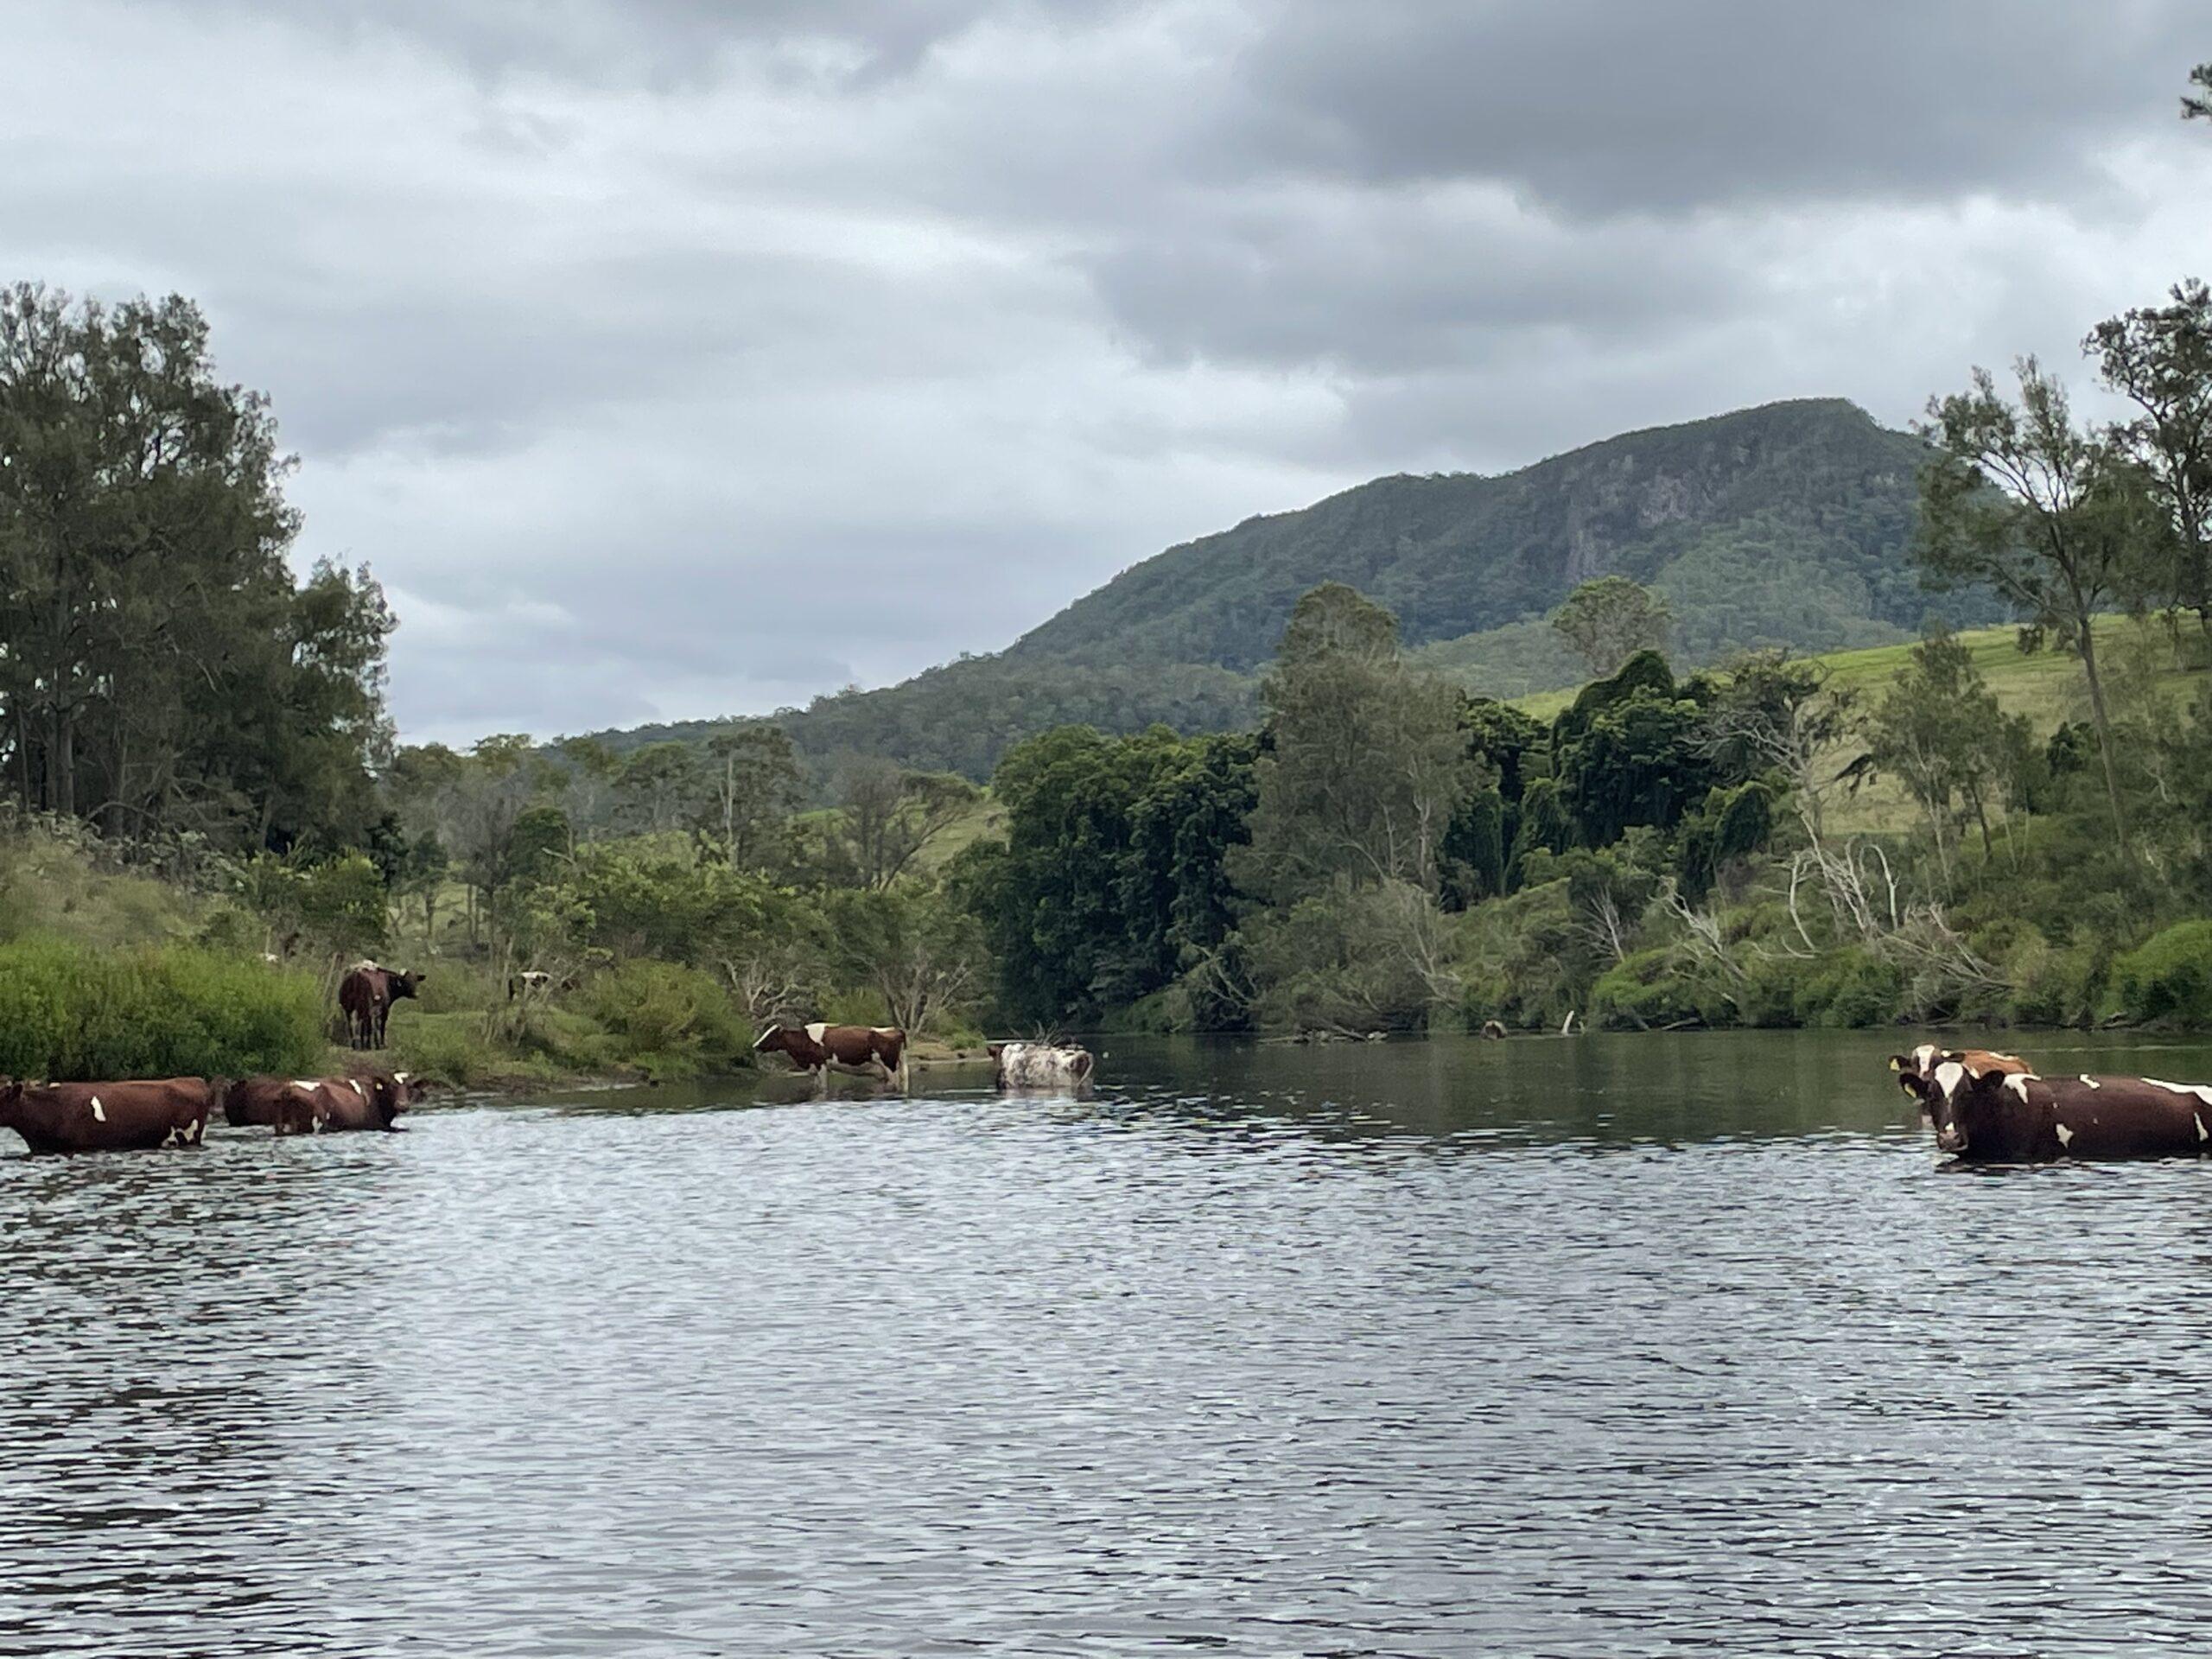 Cattle in the Mary River. Photo: Mark Kennard